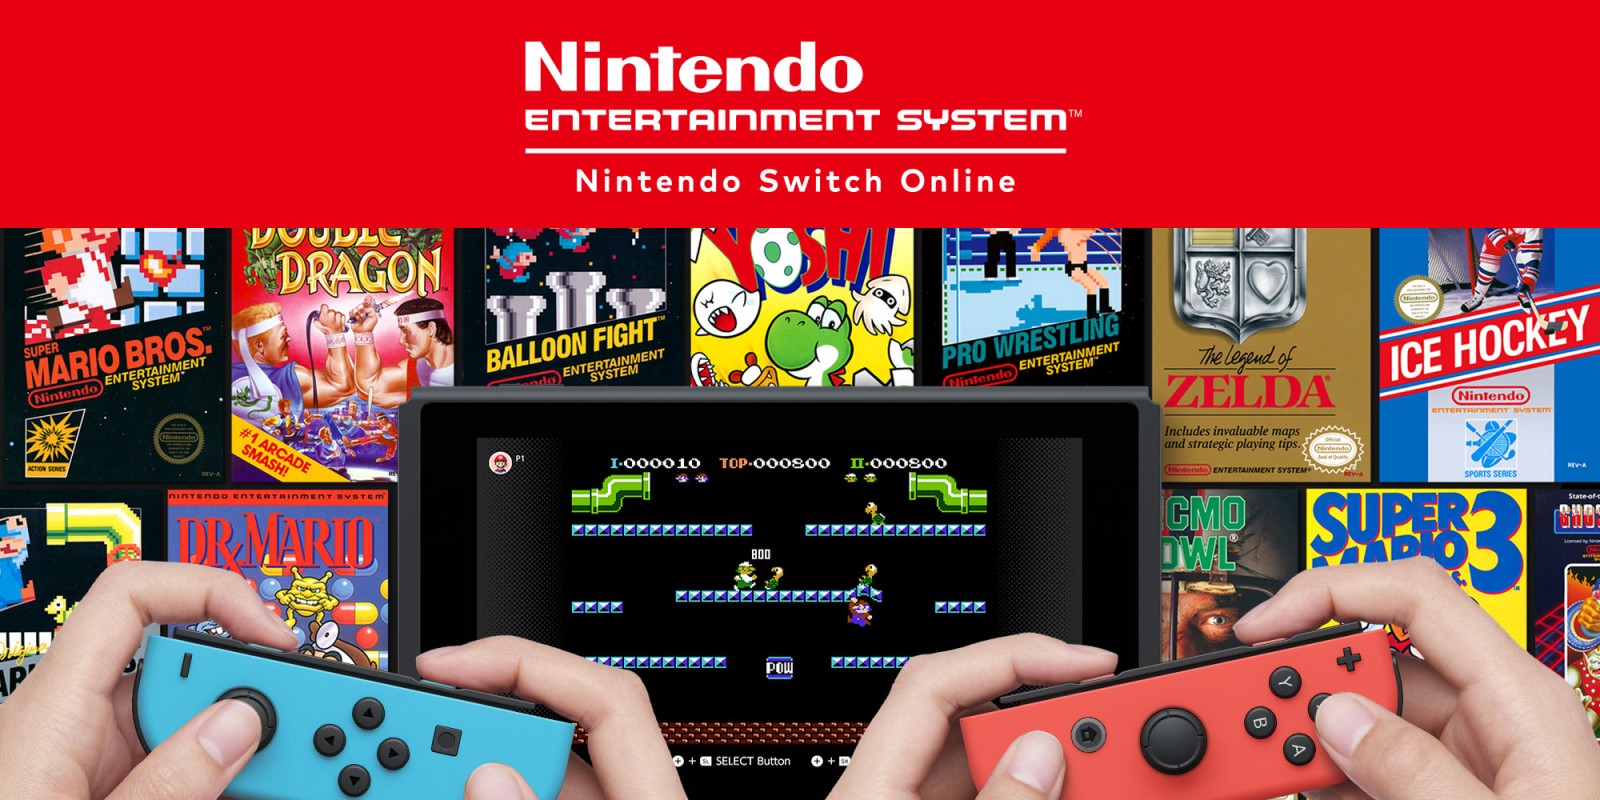 Every game coming to Nintendo Switch Online in 2023